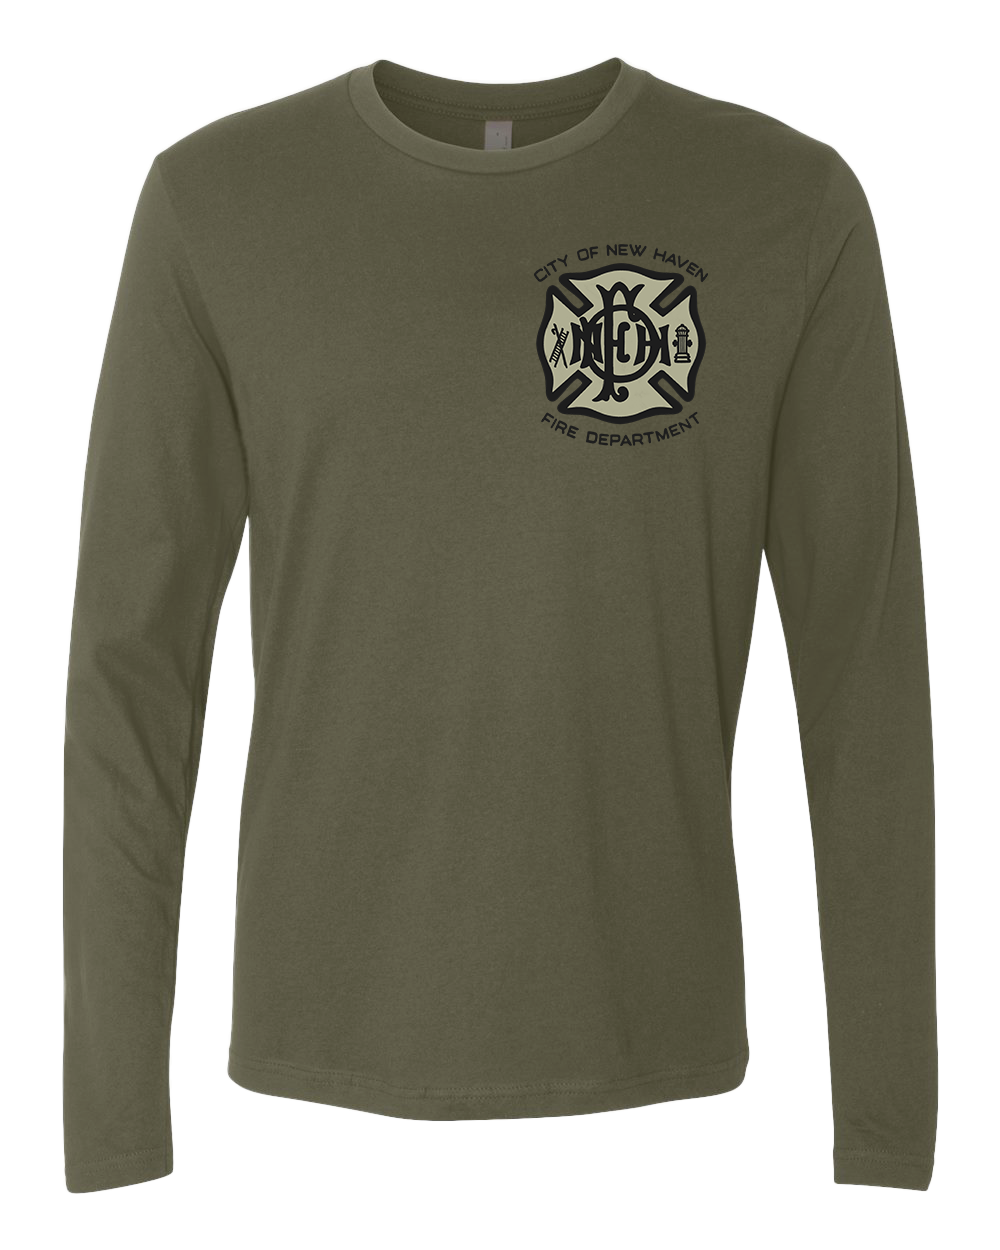 New Haven Fire Military Appreciation Long Sleeve